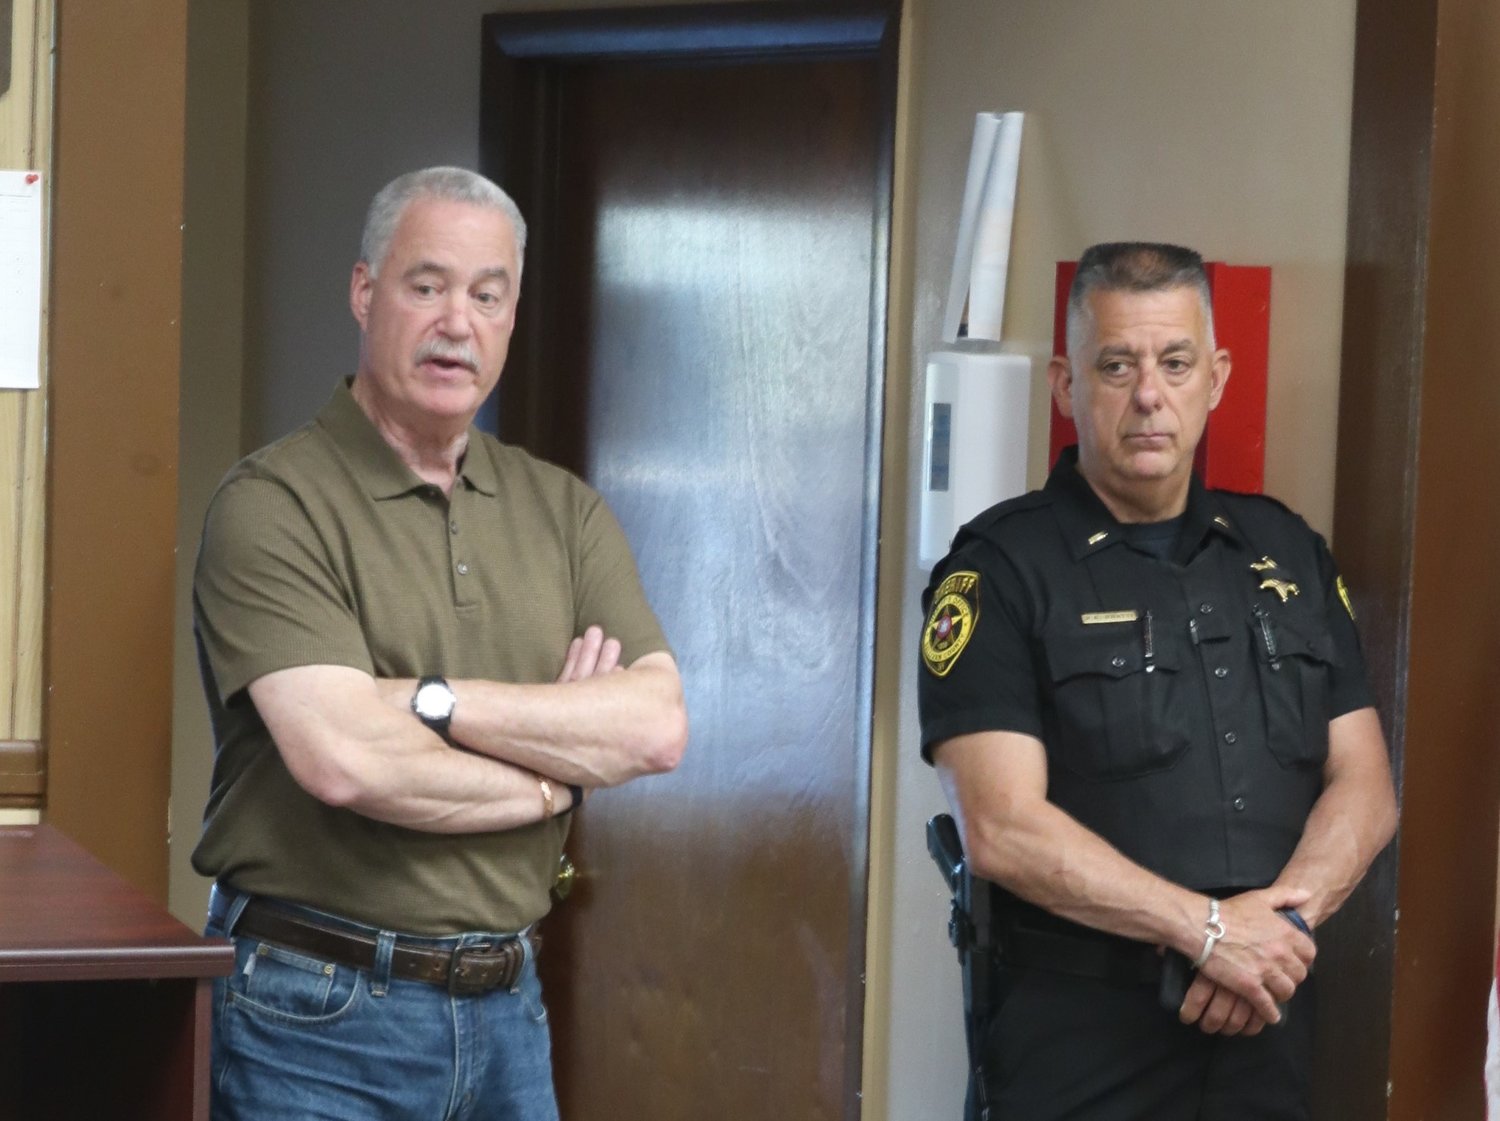 Sheriff Mike Schiff, left, and deputy Paul Pratti were in attendance at the June 14 Town of Highland board meeting. The town is exploring a contract with the sheriff to provide a dedicated police presence for approximately 32 hours a week.